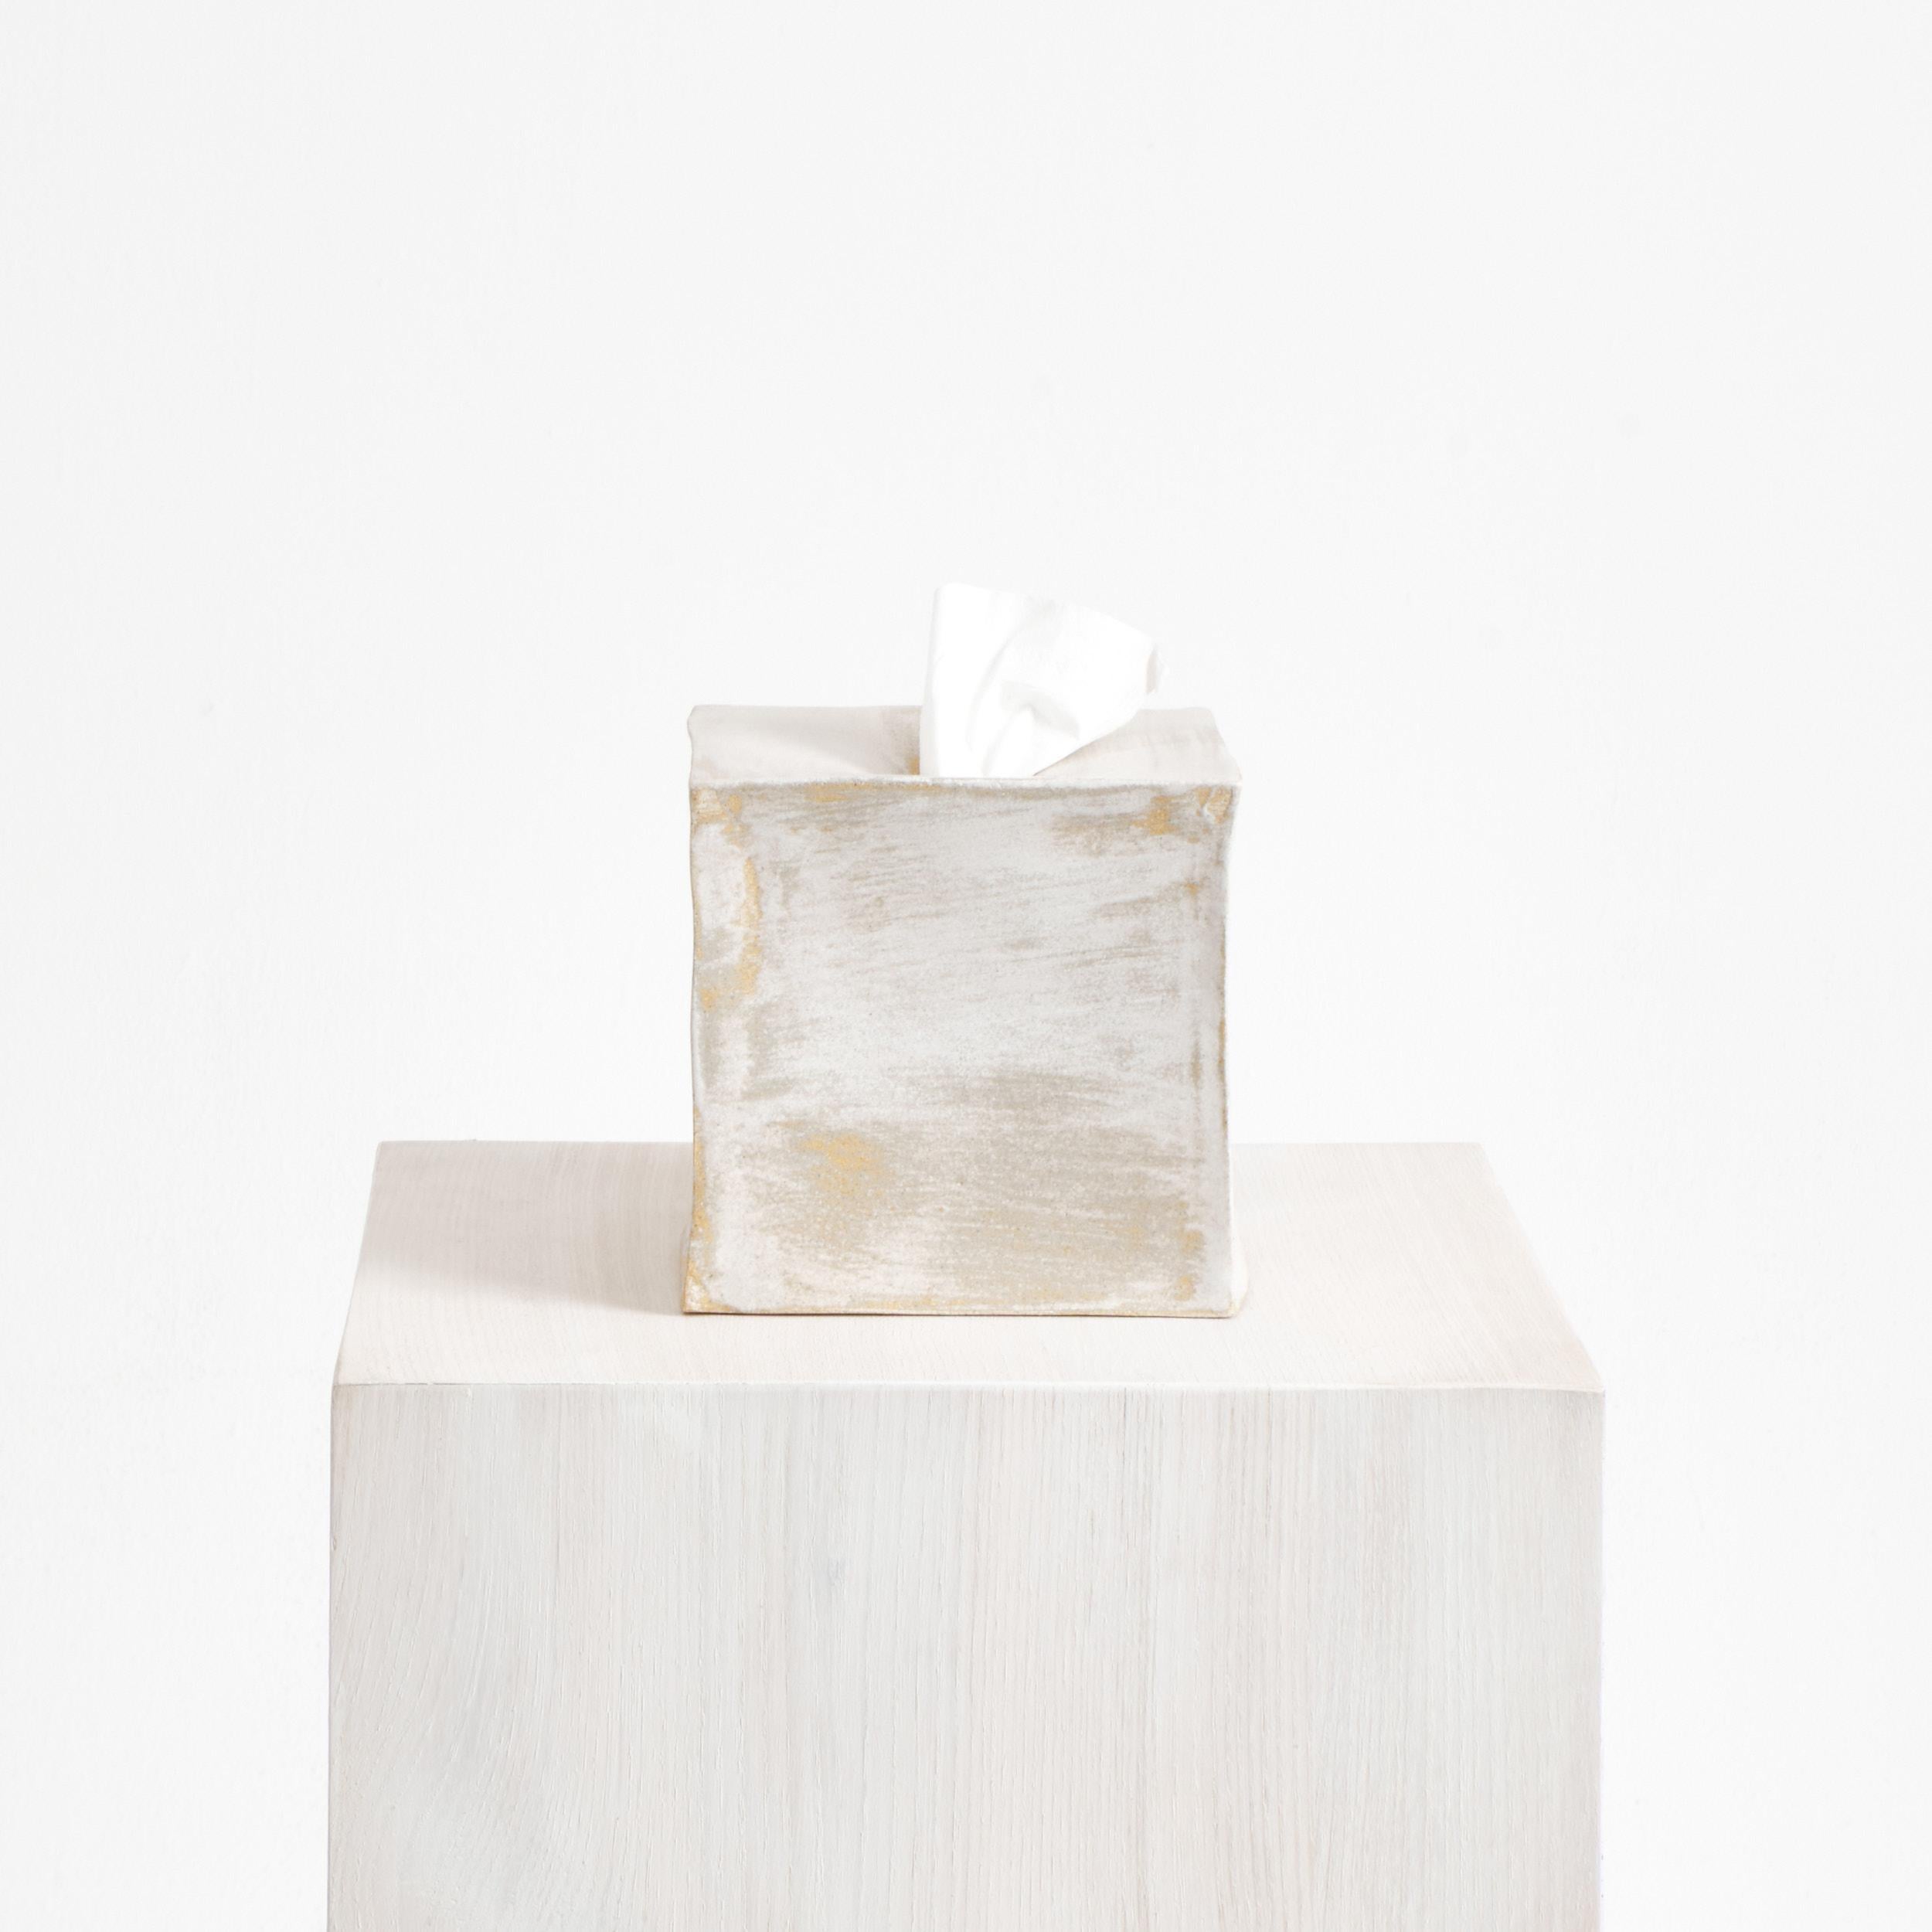 Ceramic Tissue Box Square in brushed White
Designed by Project 213A in 2023

Artisanal ceramic tissue box created by skilled artisans in Project 213A's own ceramic workshop.
The tissue box is created by hand and finished with a brushed glaze